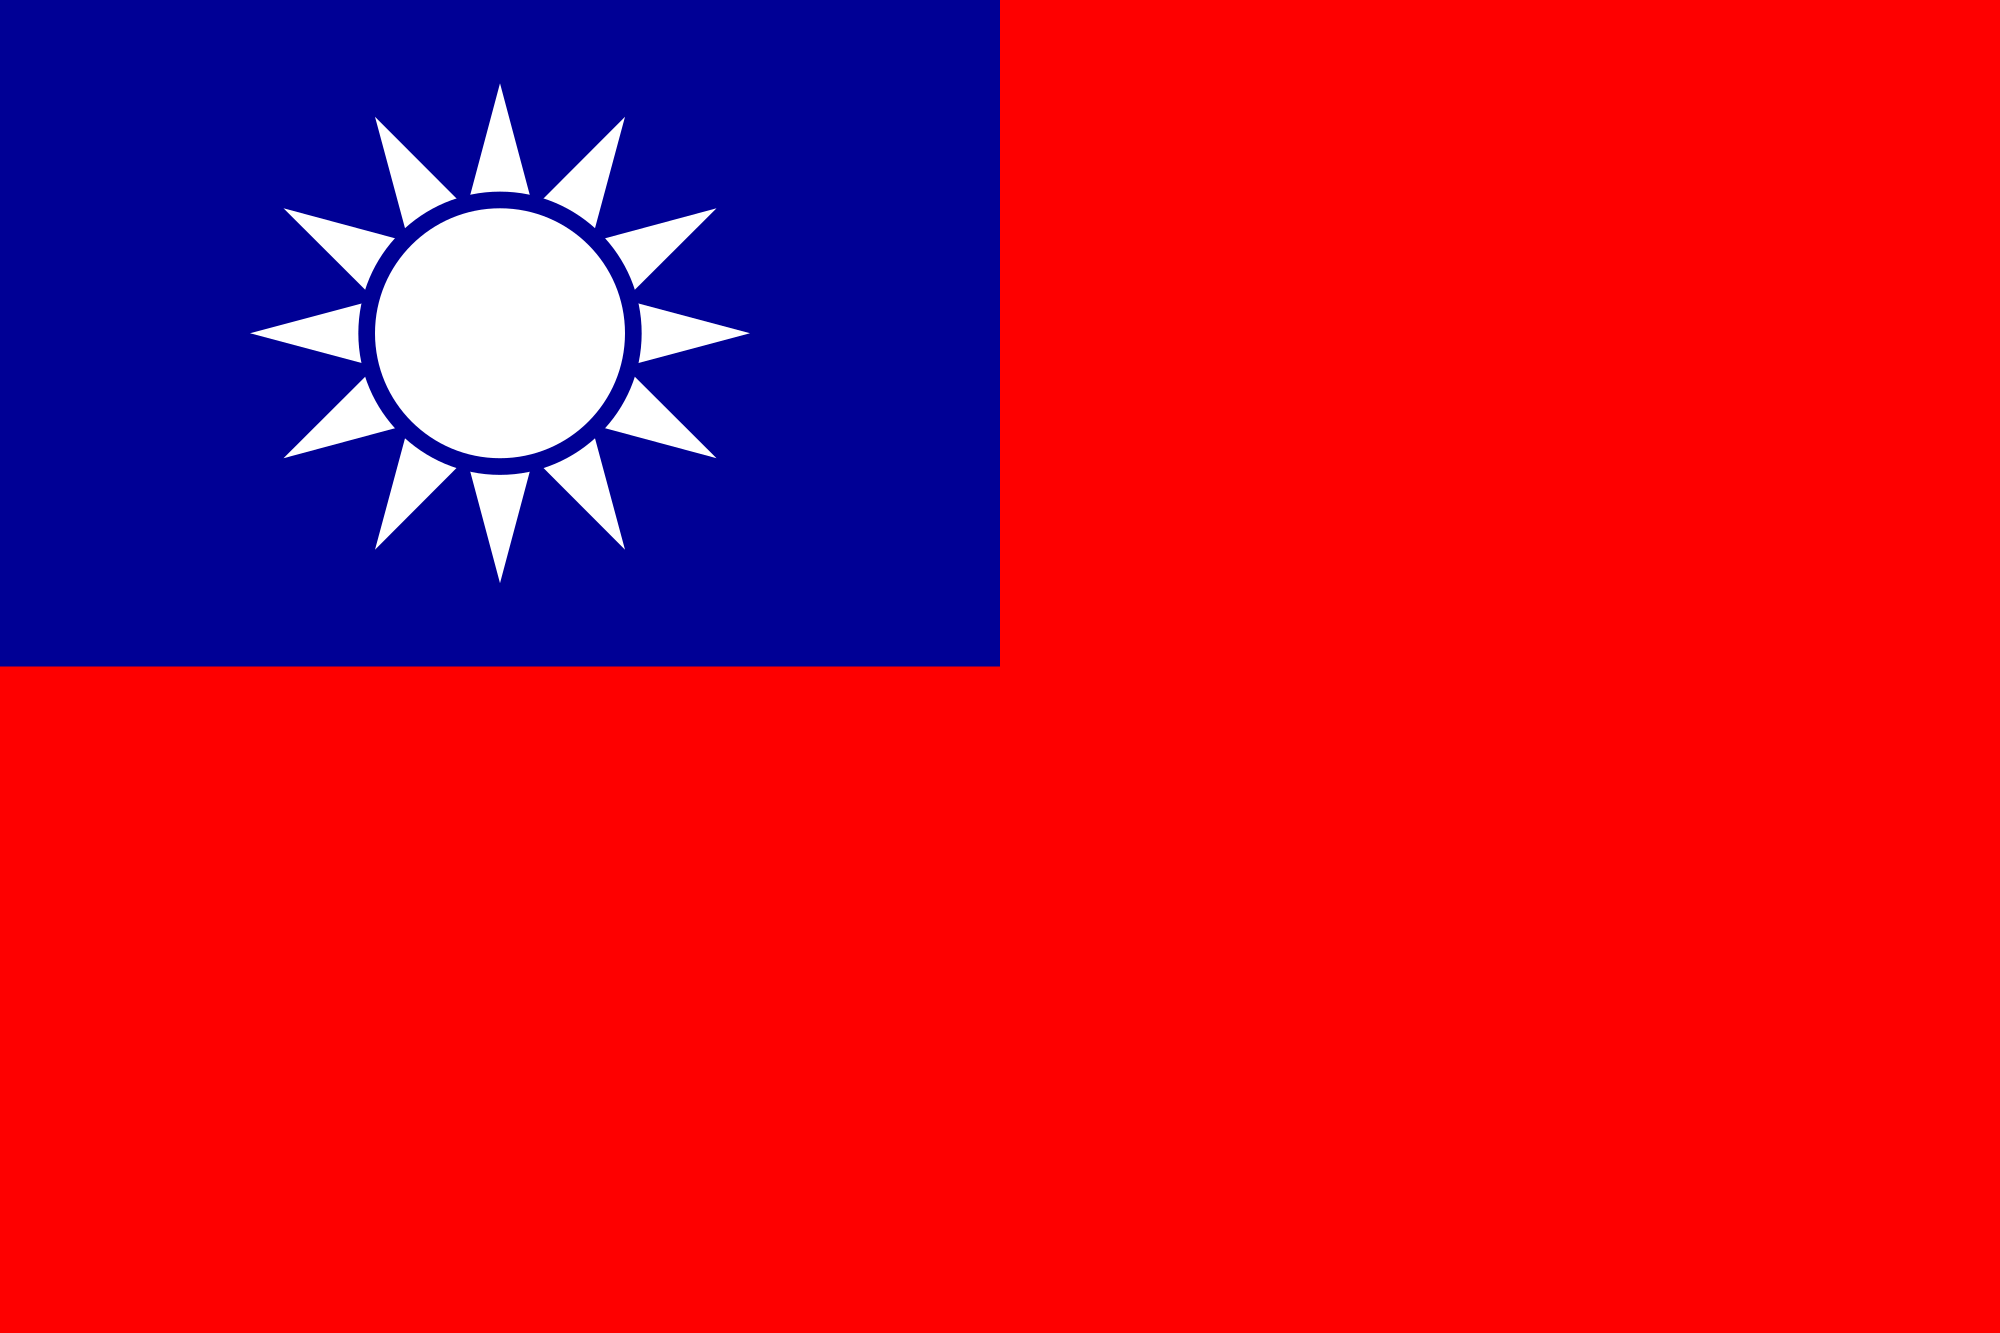 3 People in Blue Square Logo - Flag of the Republic of China